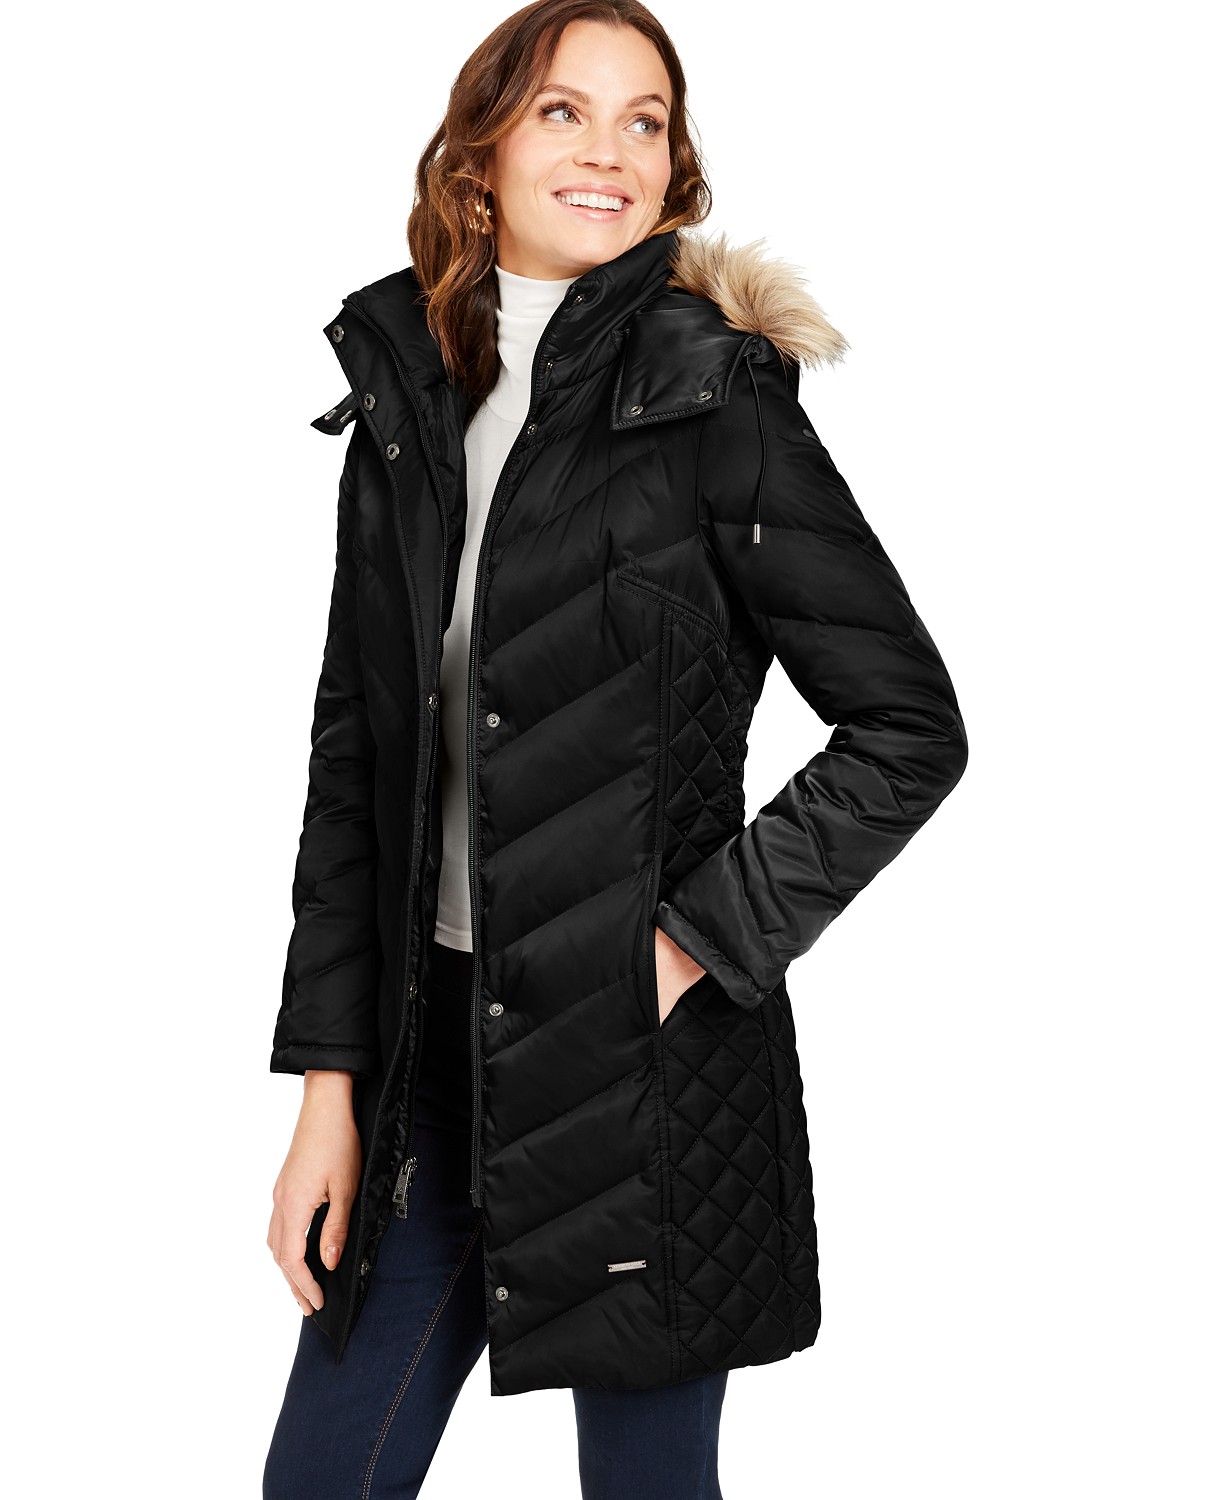 Kenneth Cole New York Women's Quilted Puffer Jacket with Faux Fur Trimmed Hood 